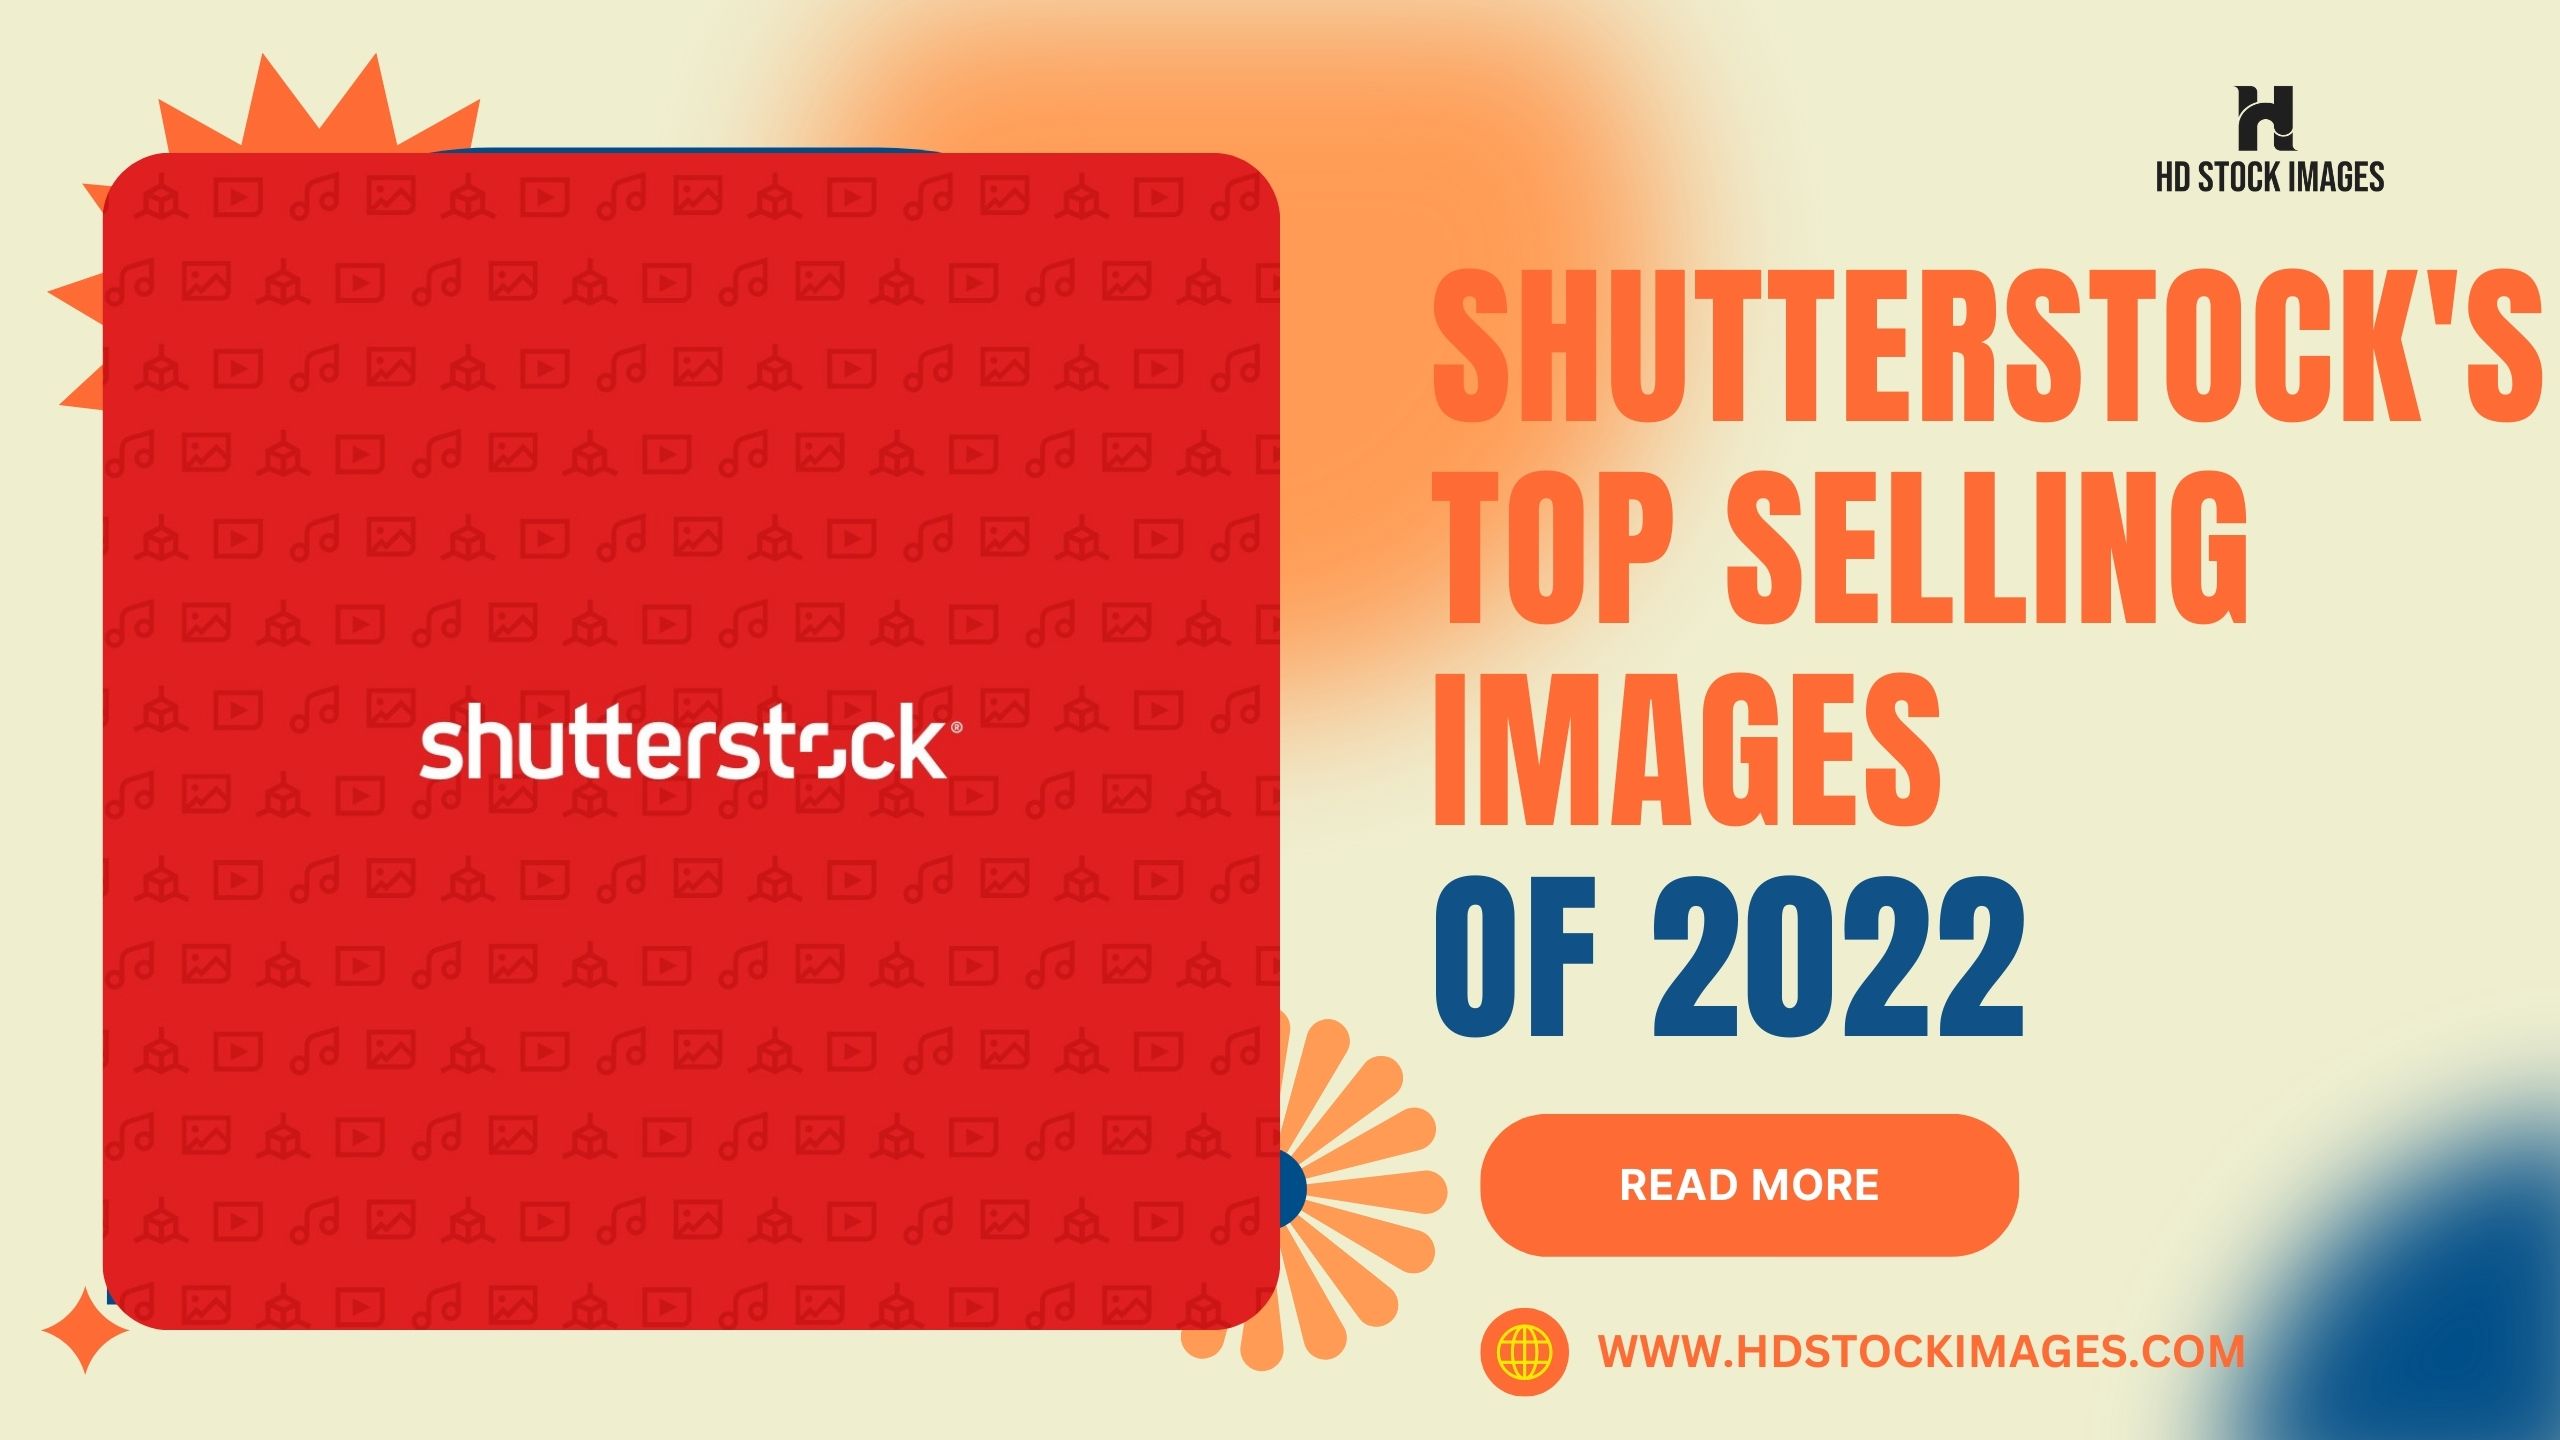 an image of Shutterstock's Top Selling Images of 2022: Examining the Trendsetters and High Performers